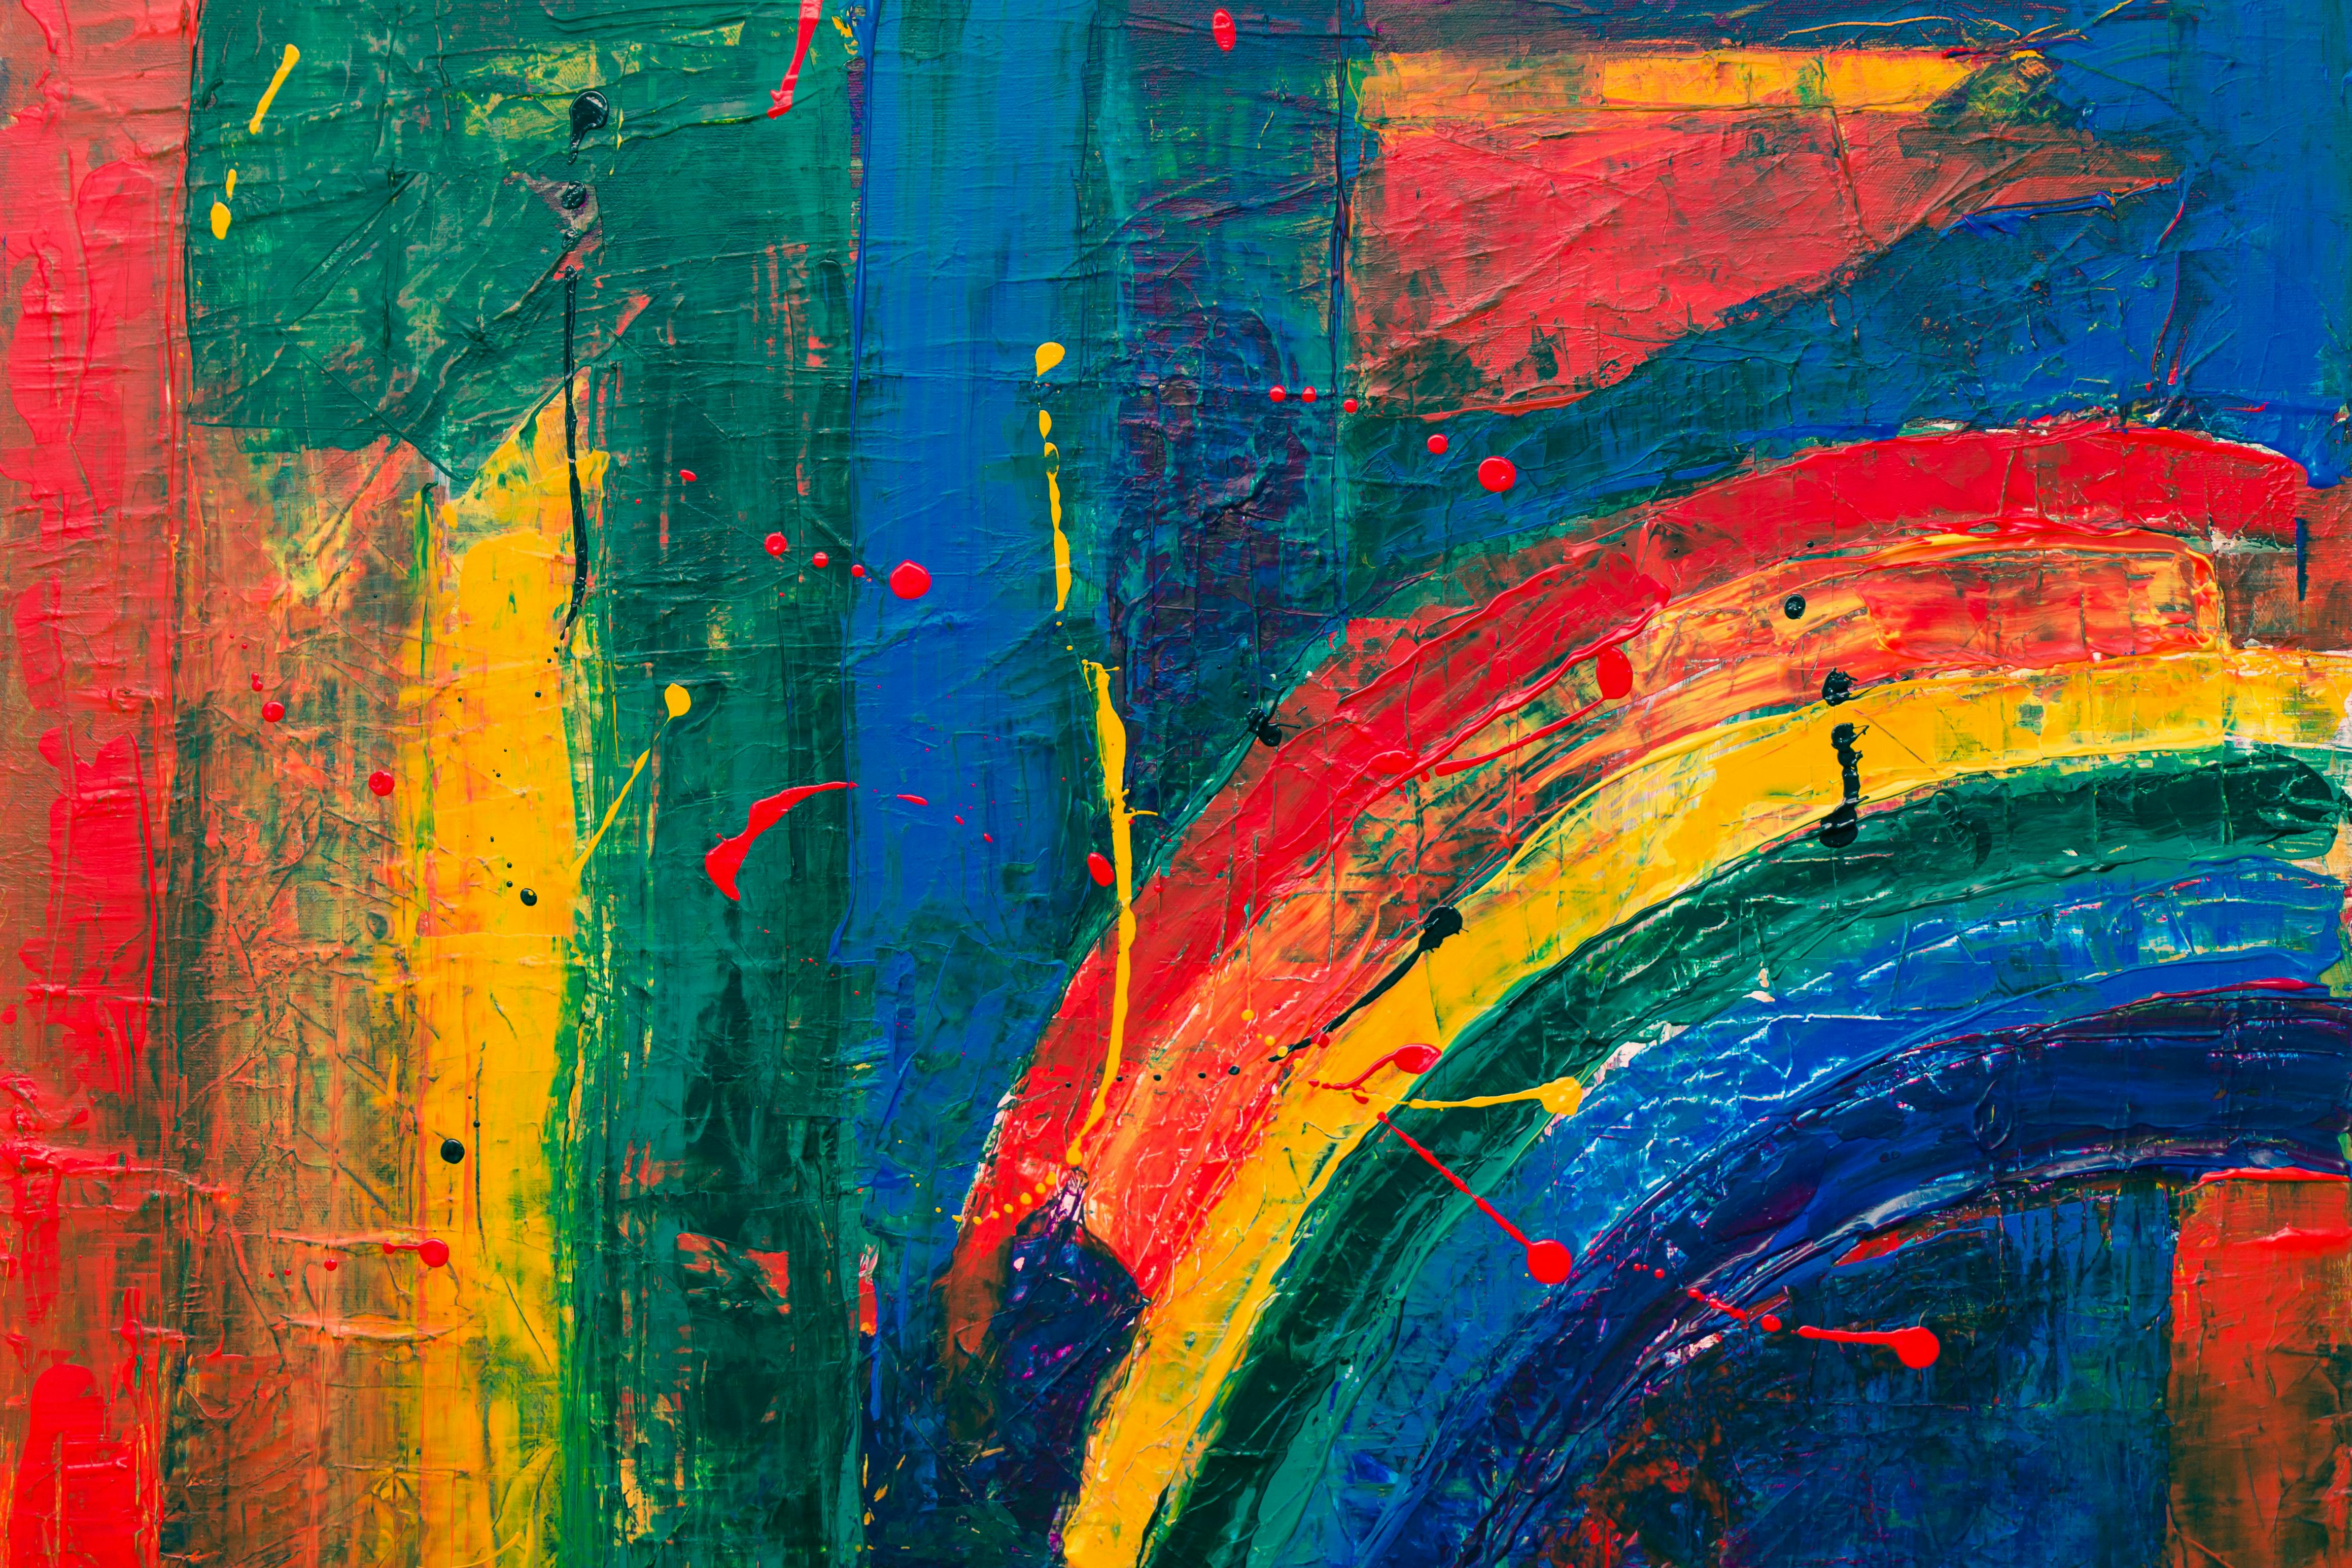  Abstract  Painting   Free  Stock Photo